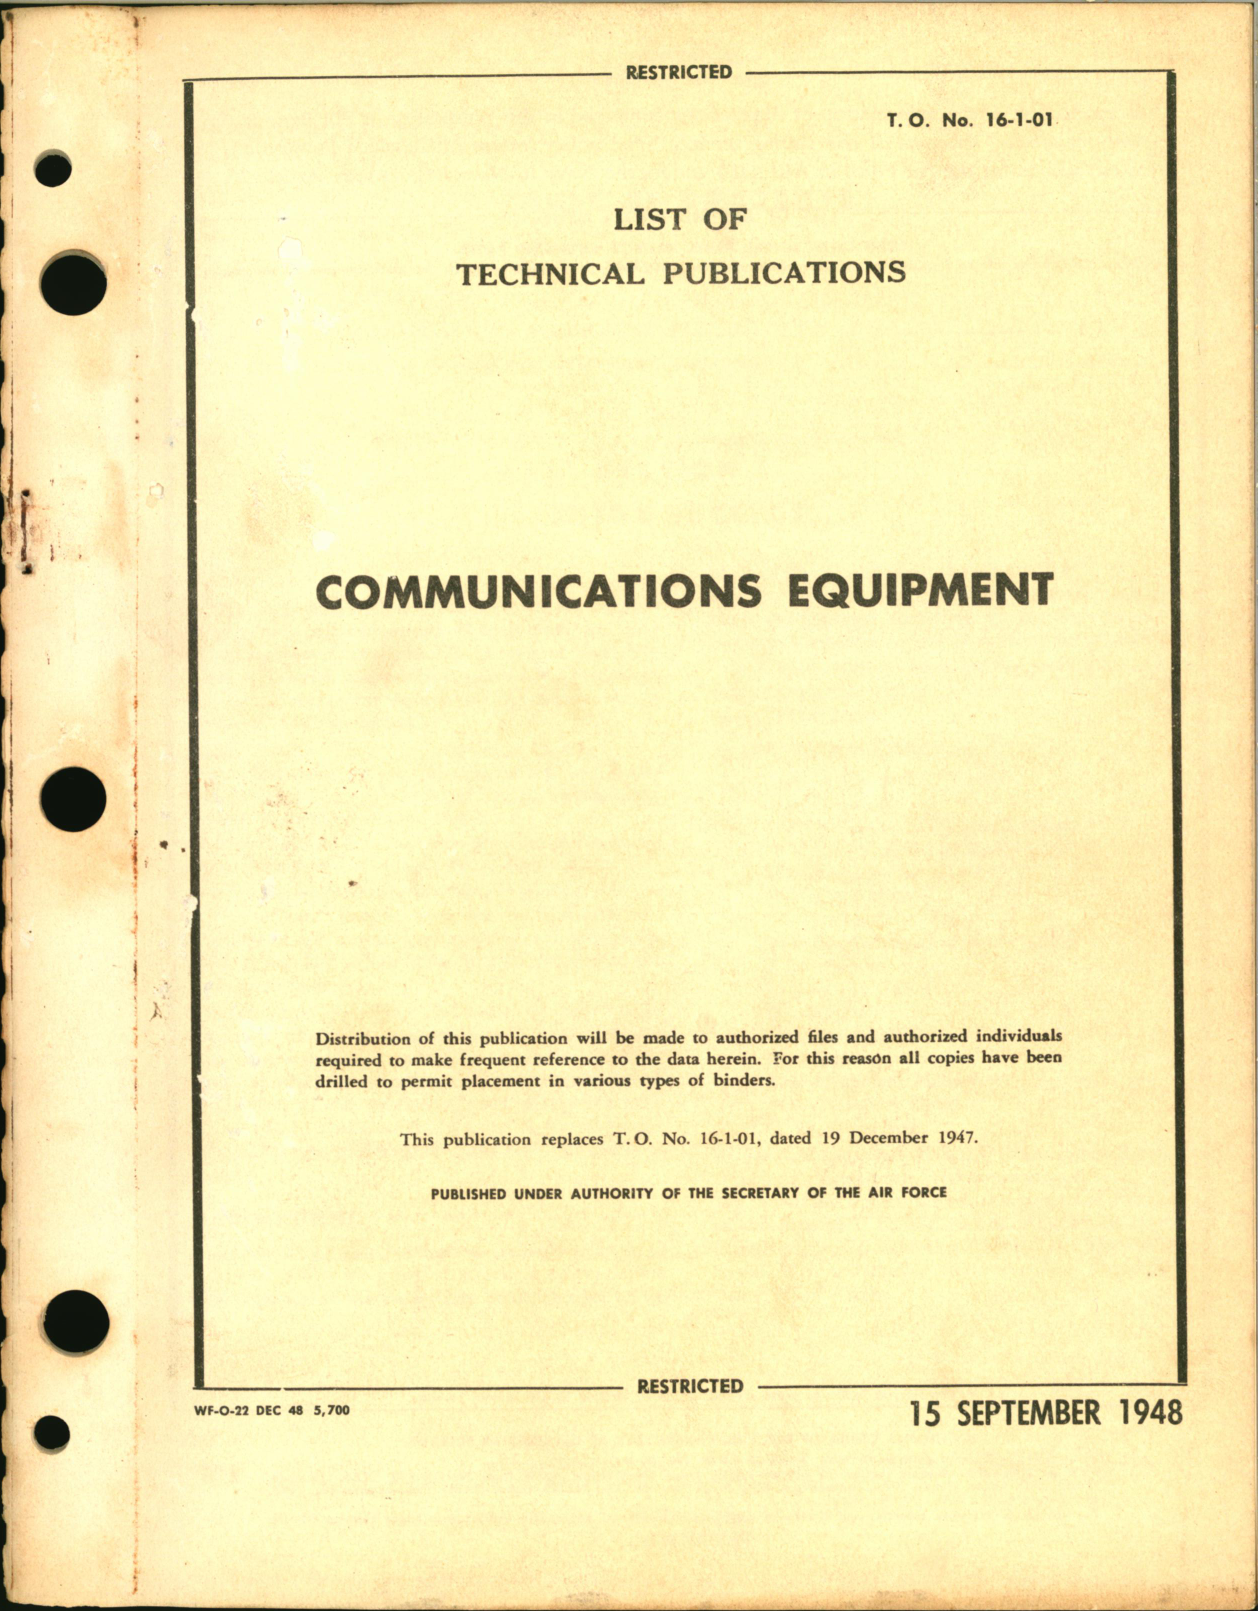 Sample page 1 from AirCorps Library document: List of Technical Publications - Communications Equipment